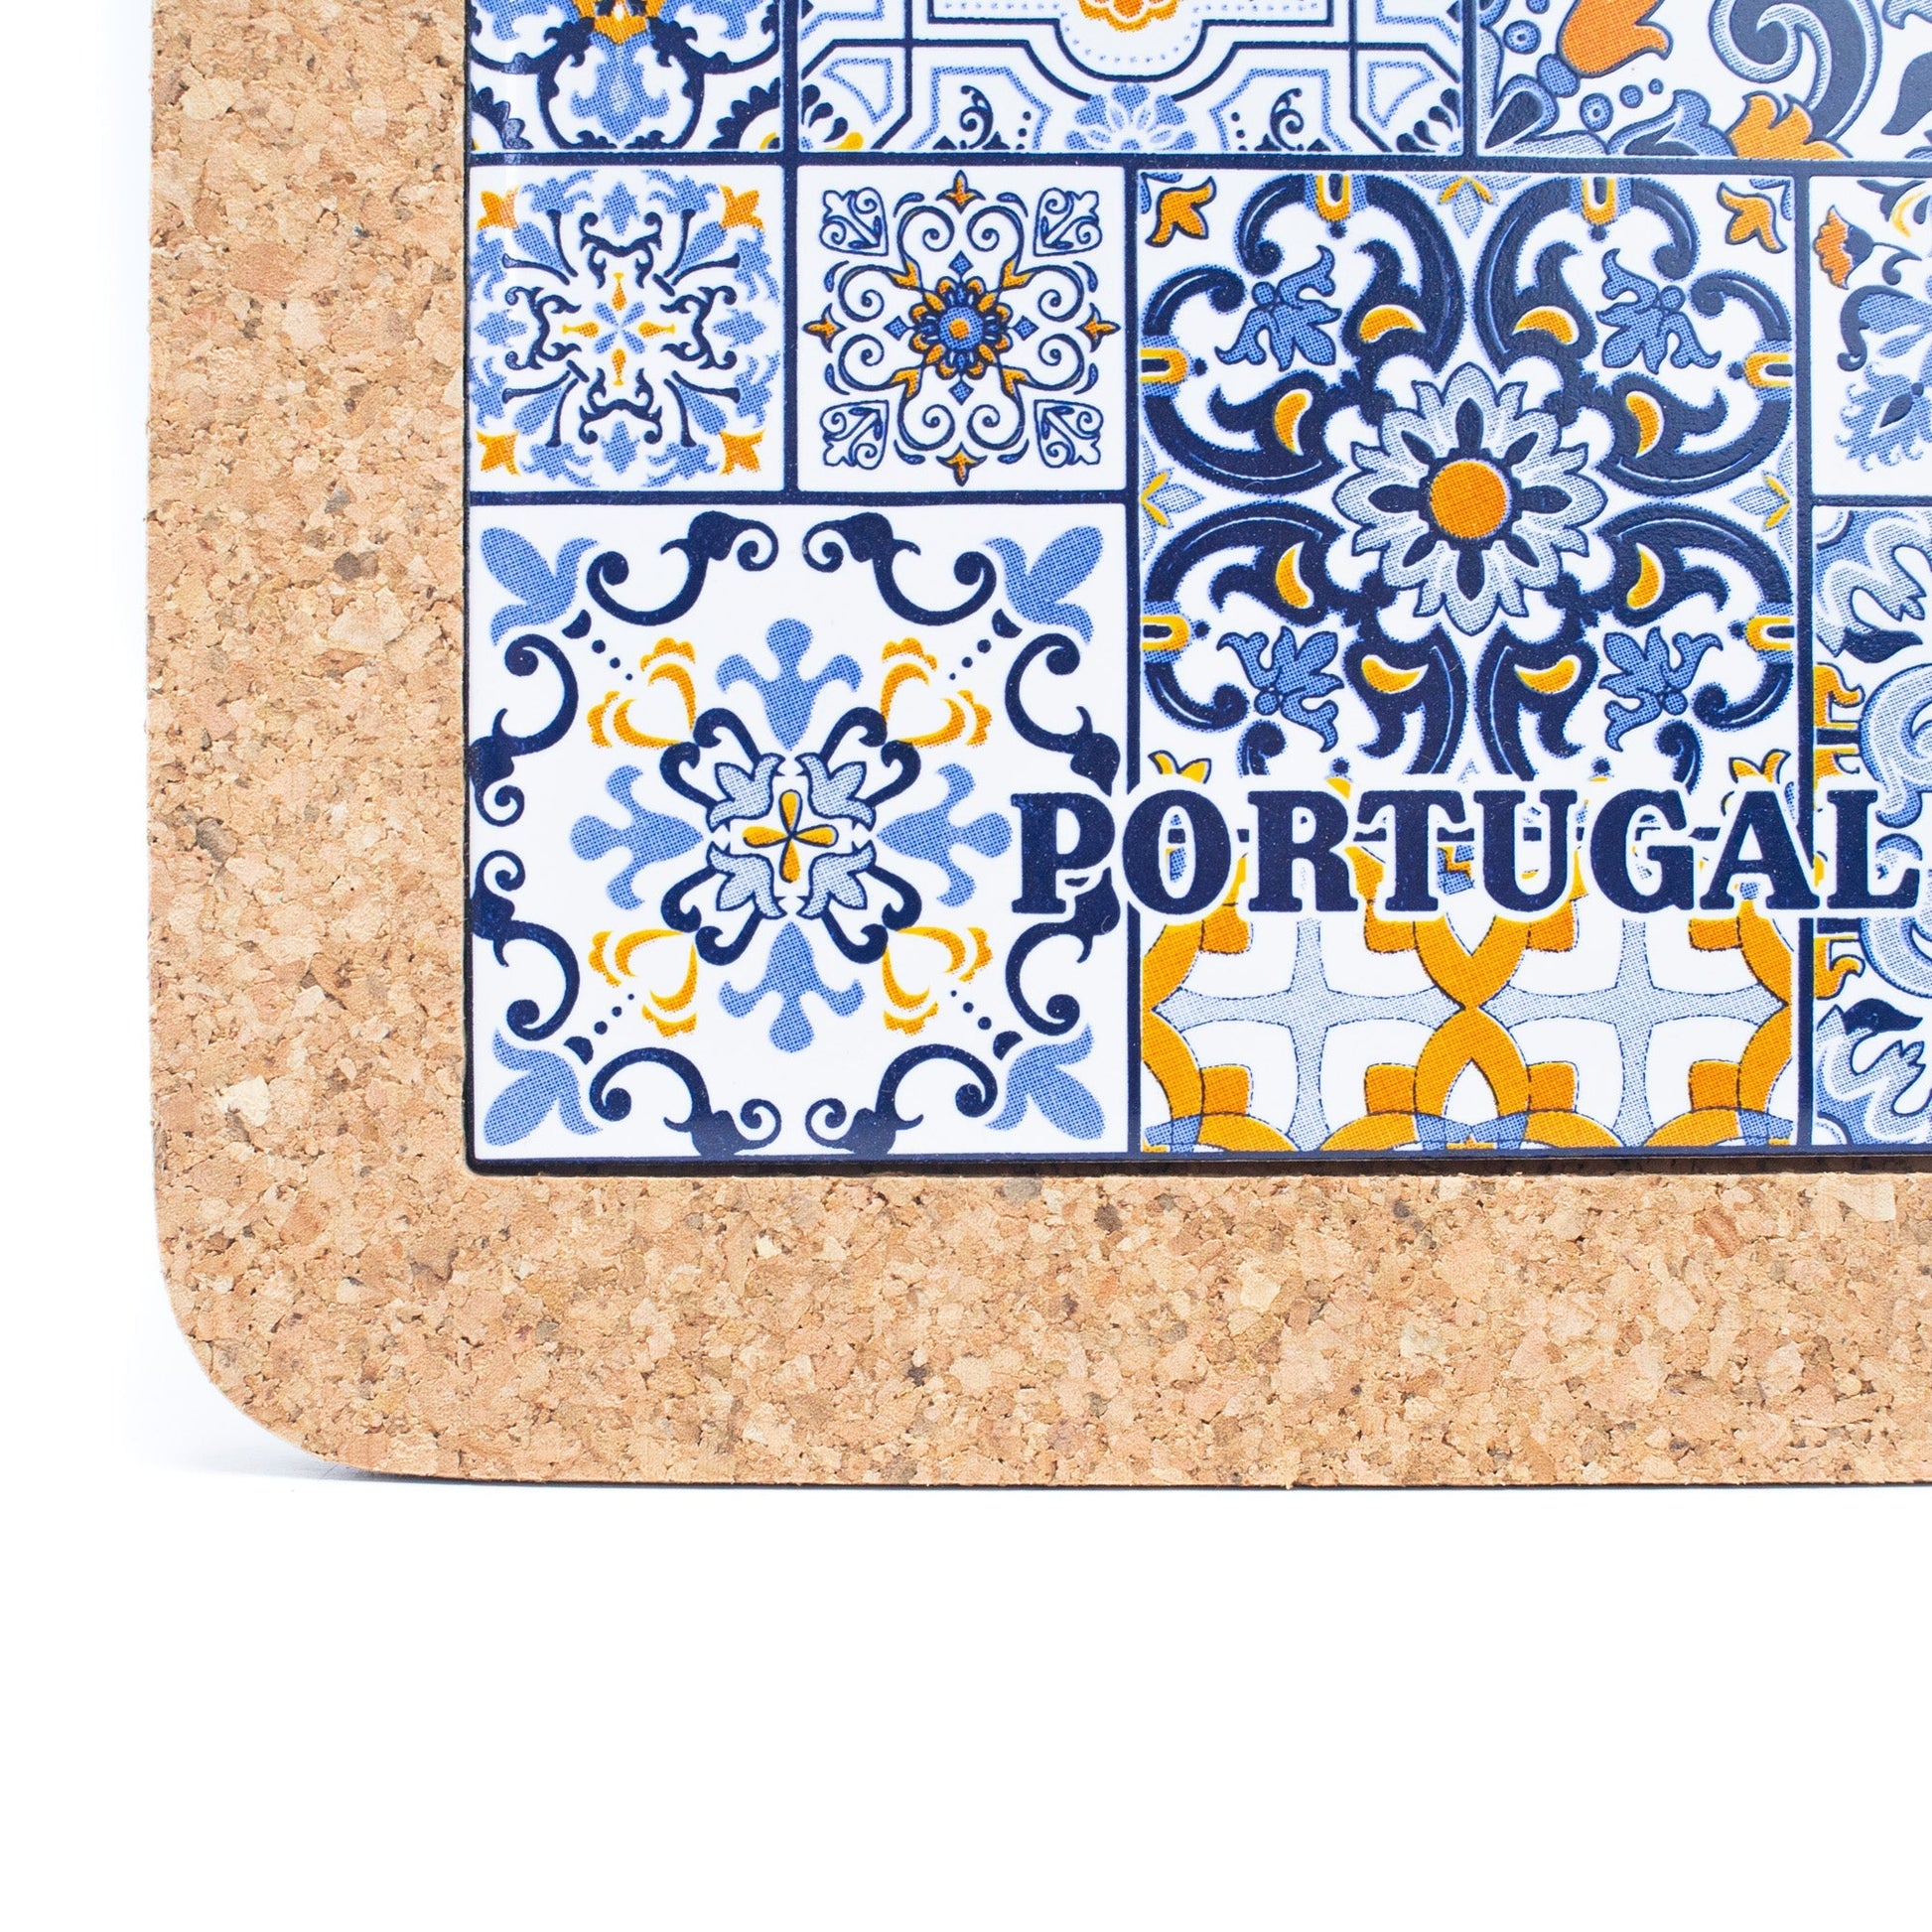 Cork Trivet with Portuguese Azulejo Print - L852 (Set of 5 units) | Trivets | Iberica - Pretty things from Portugal